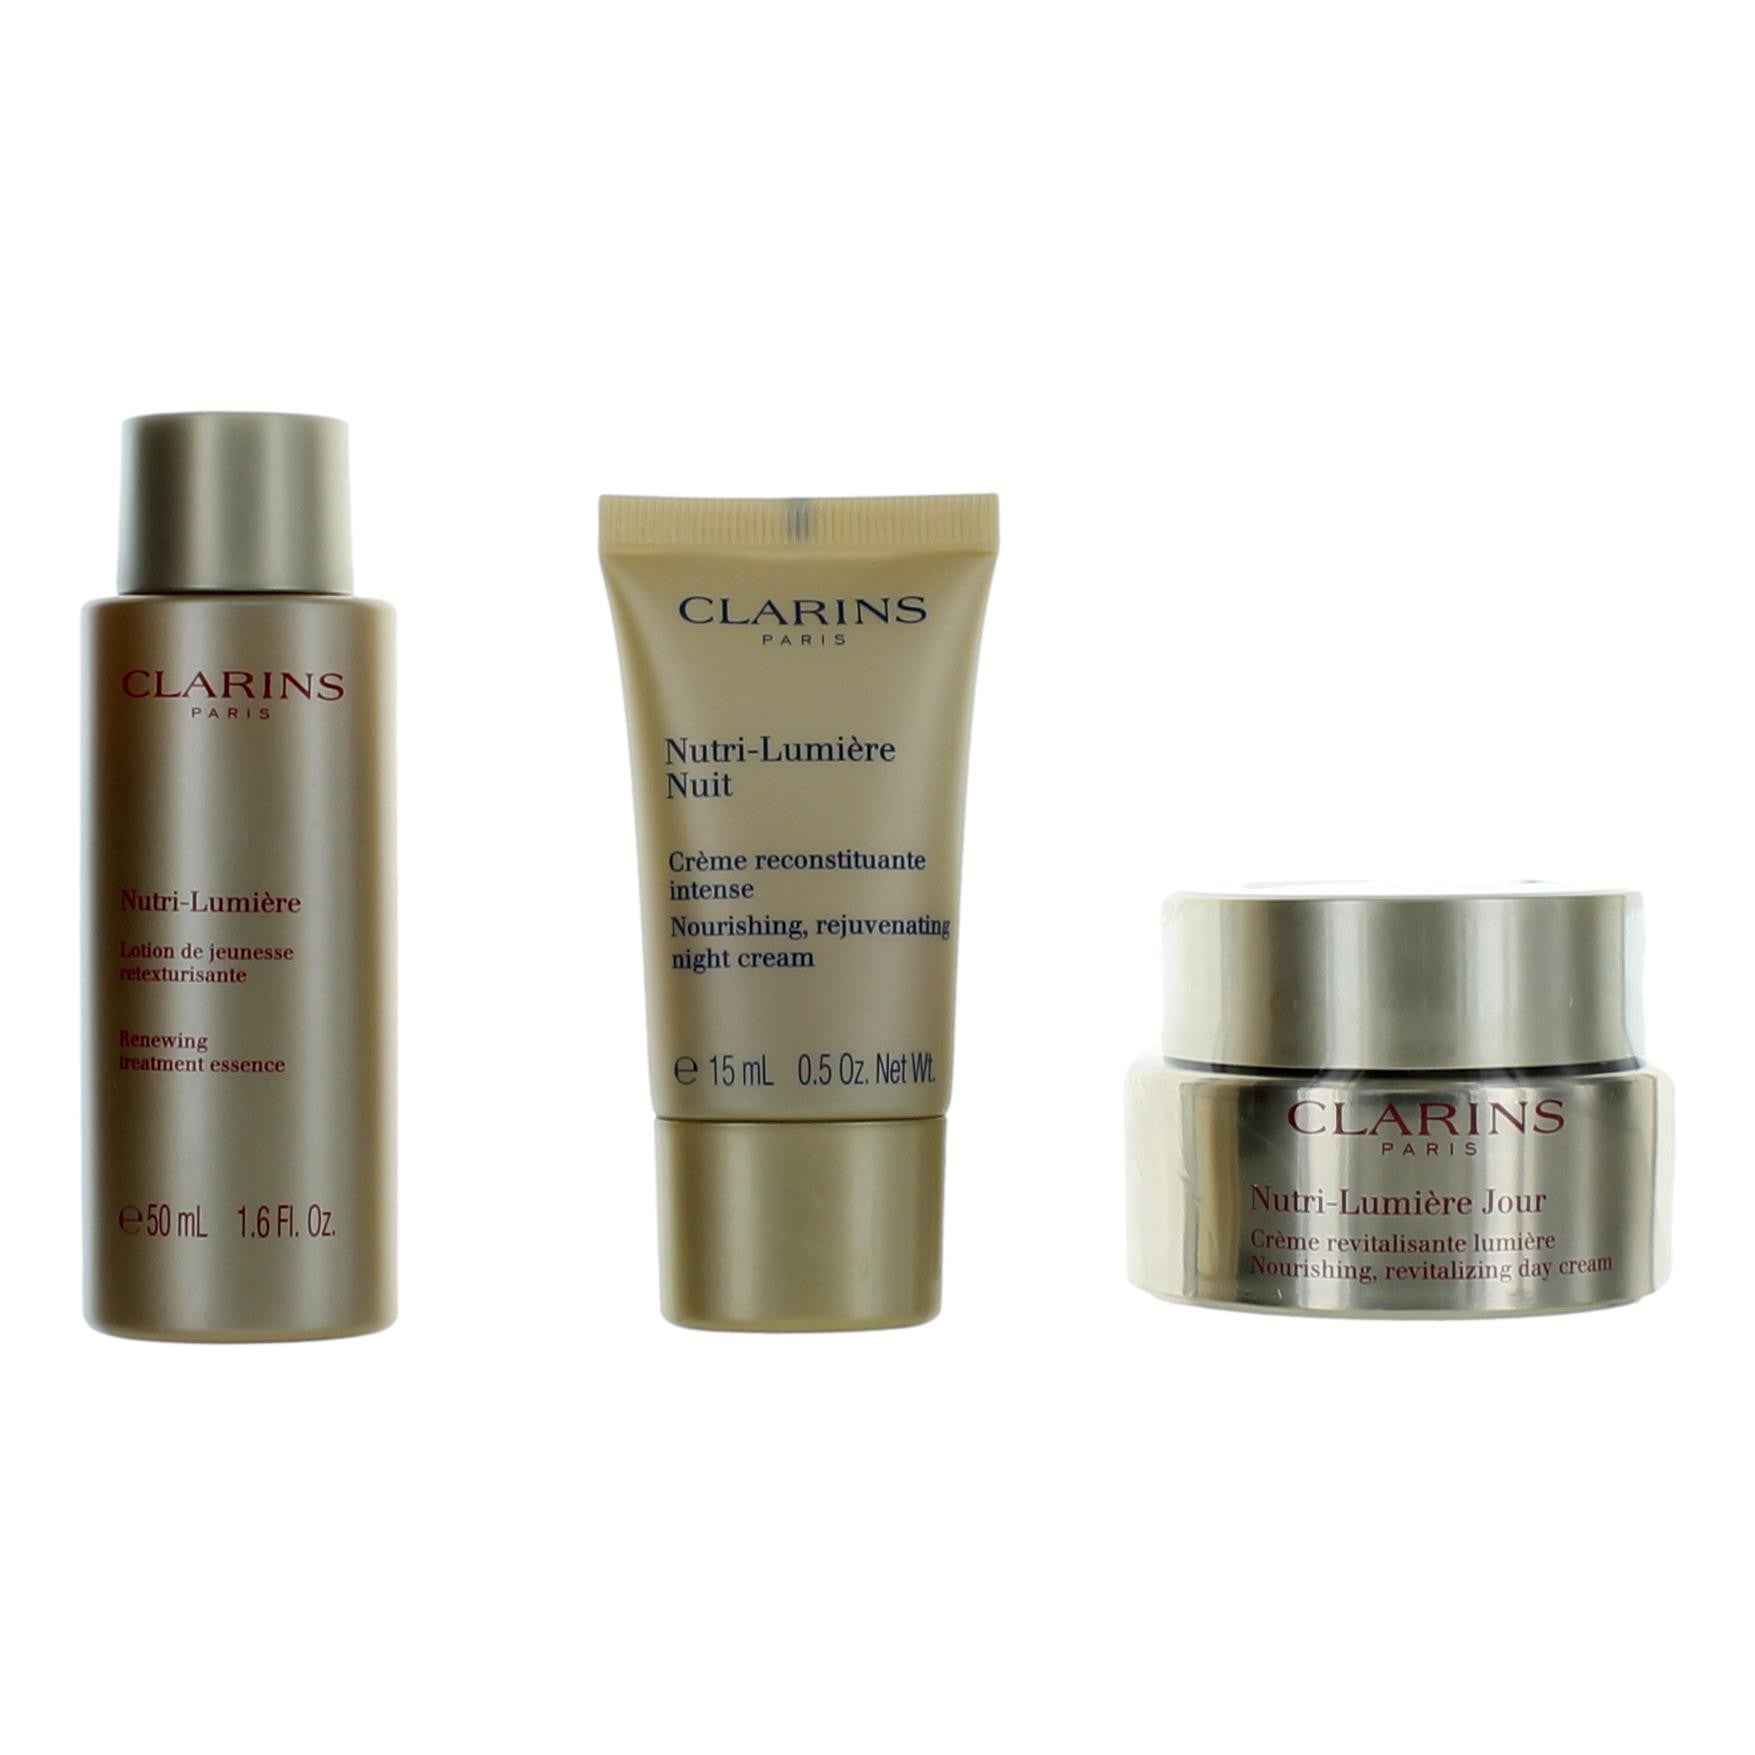 Clarins by Clarins, 3 Piece Essential Care Gift Set